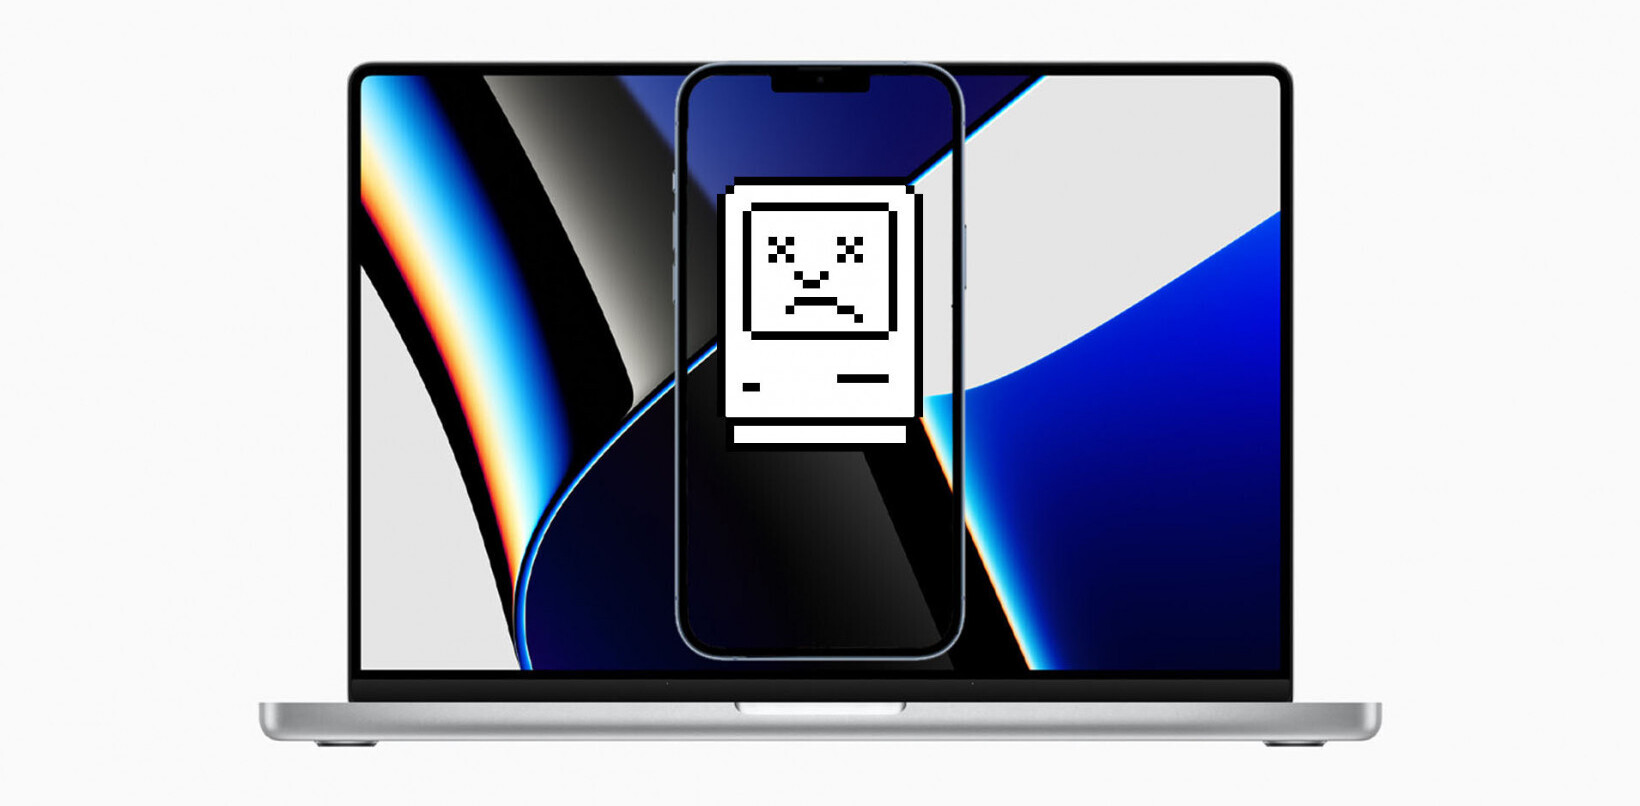 Apple’s explanation for no Face ID on the MacBook Pro is nonsense